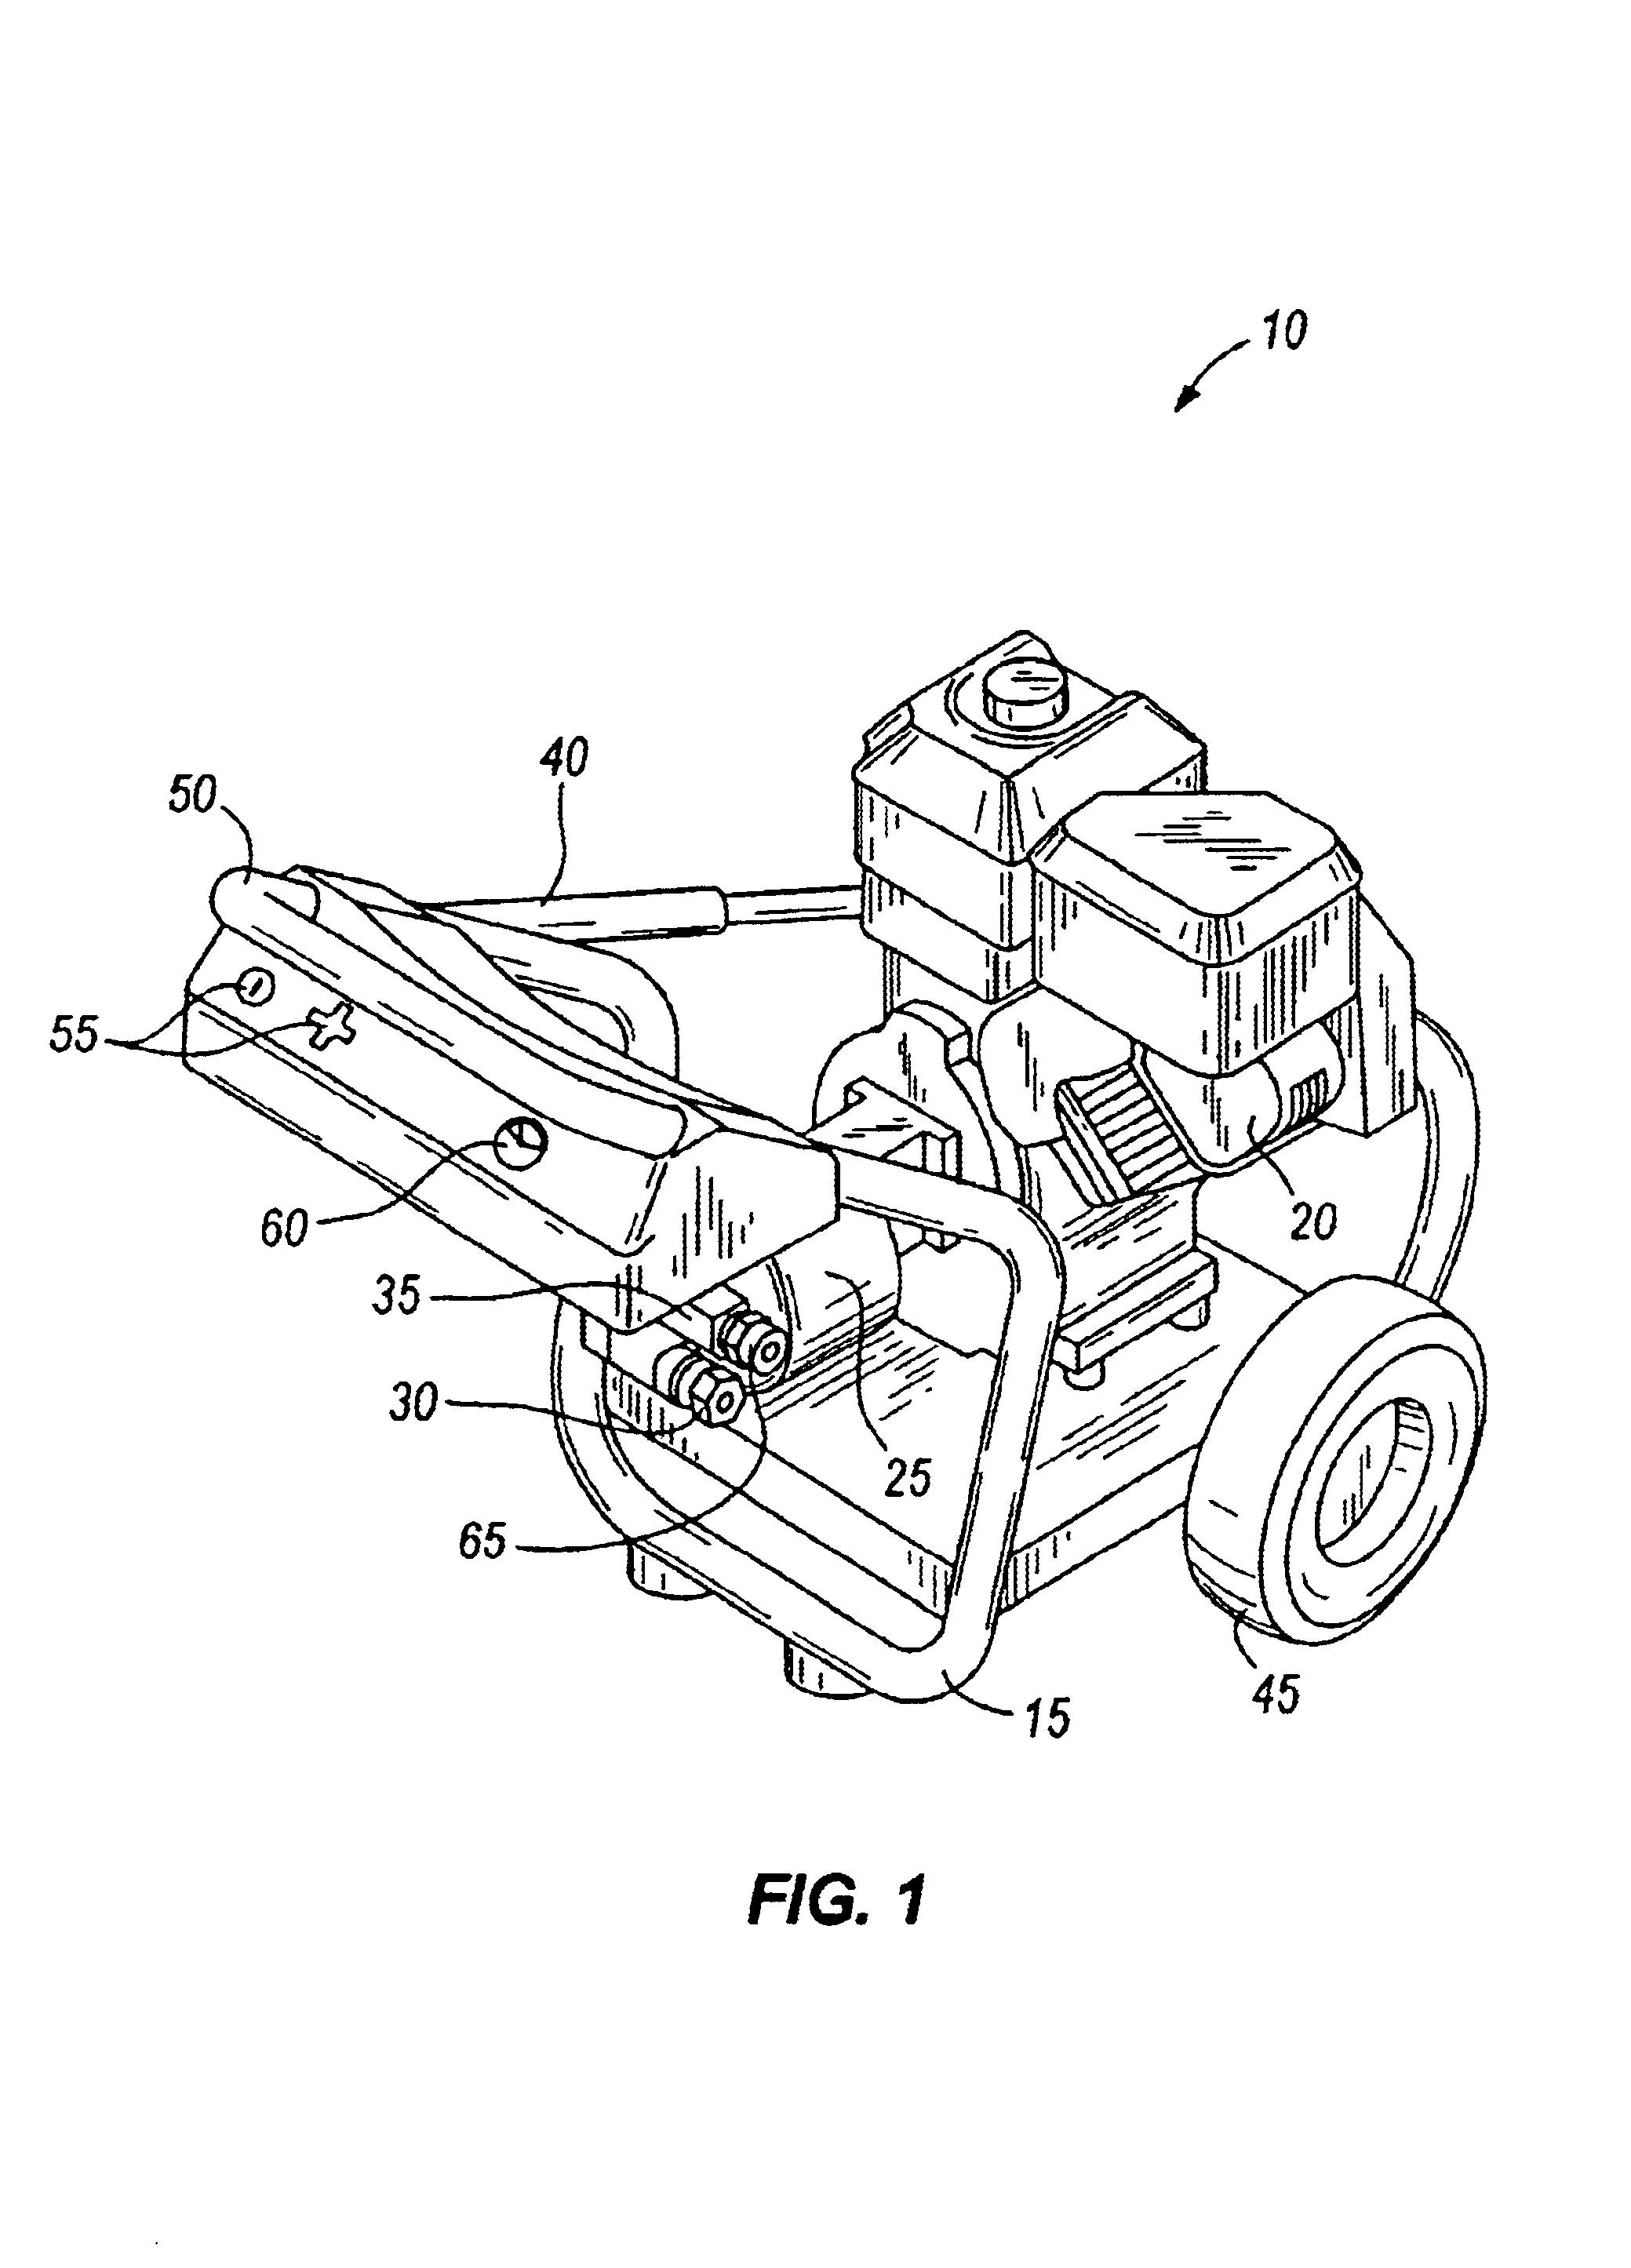 Flow-actuated trapped-pressure unloader valve